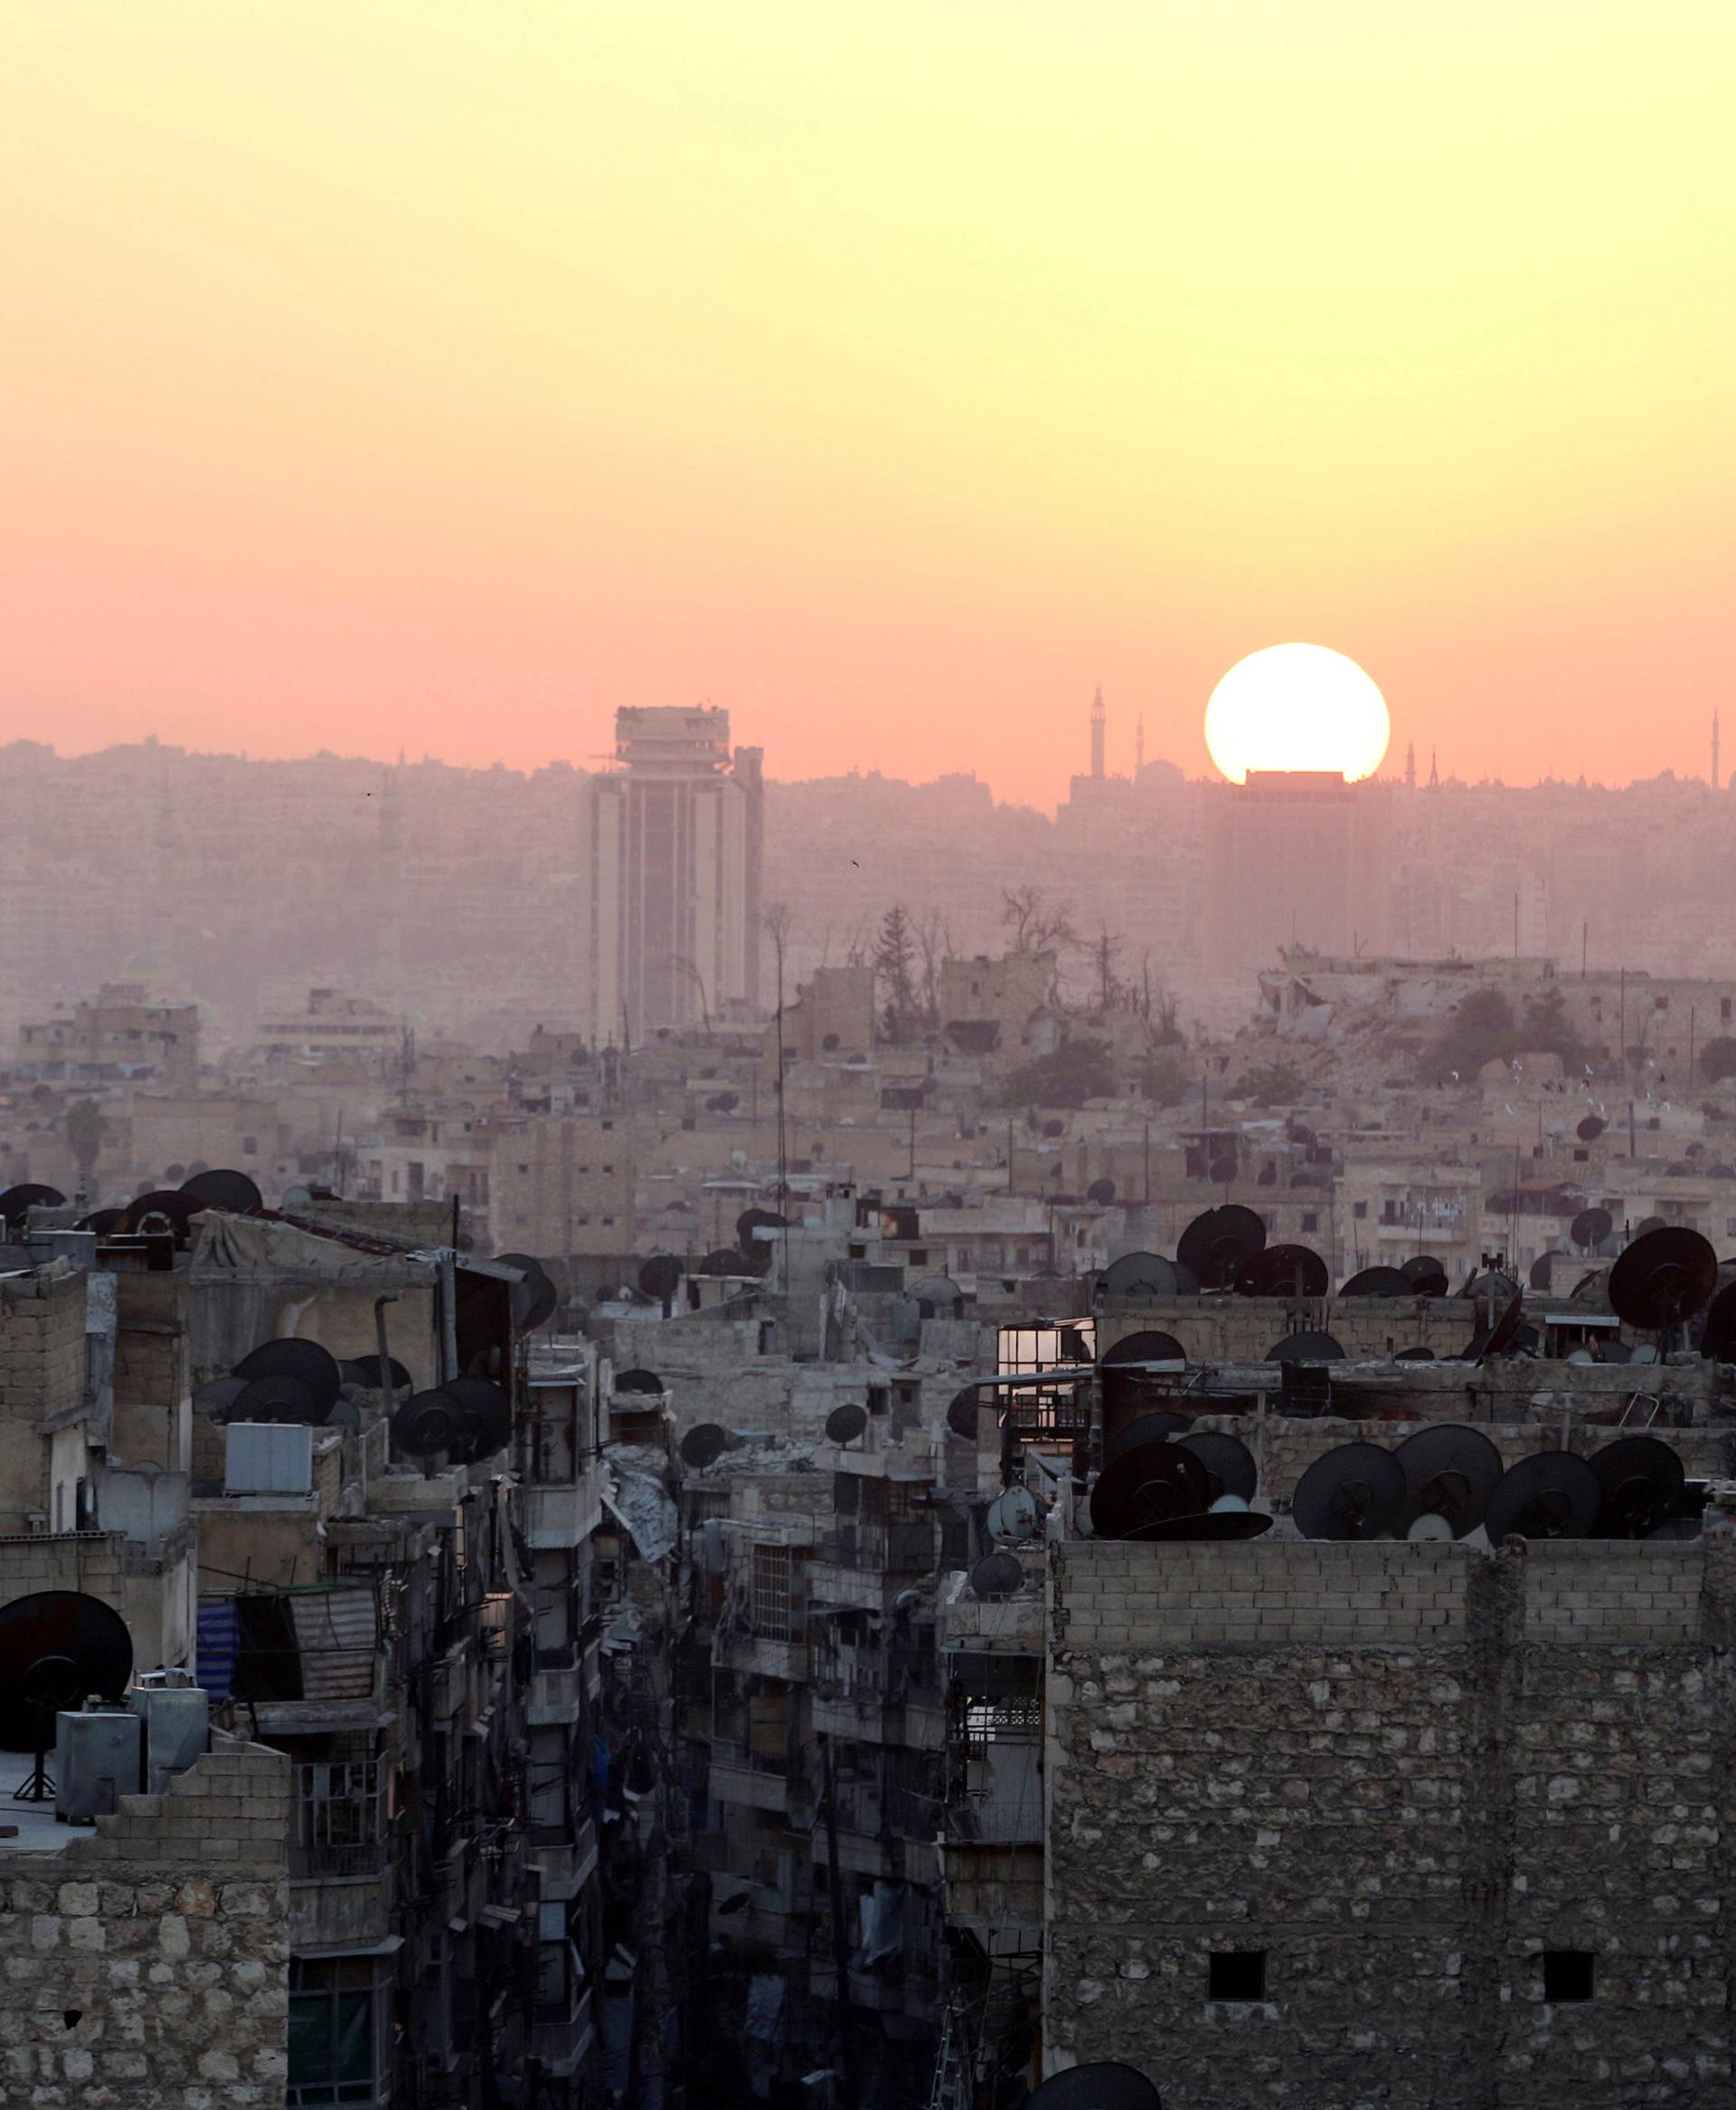 FILE PHOTO: The sun sets over Aleppo as seen from rebel-held part of the city